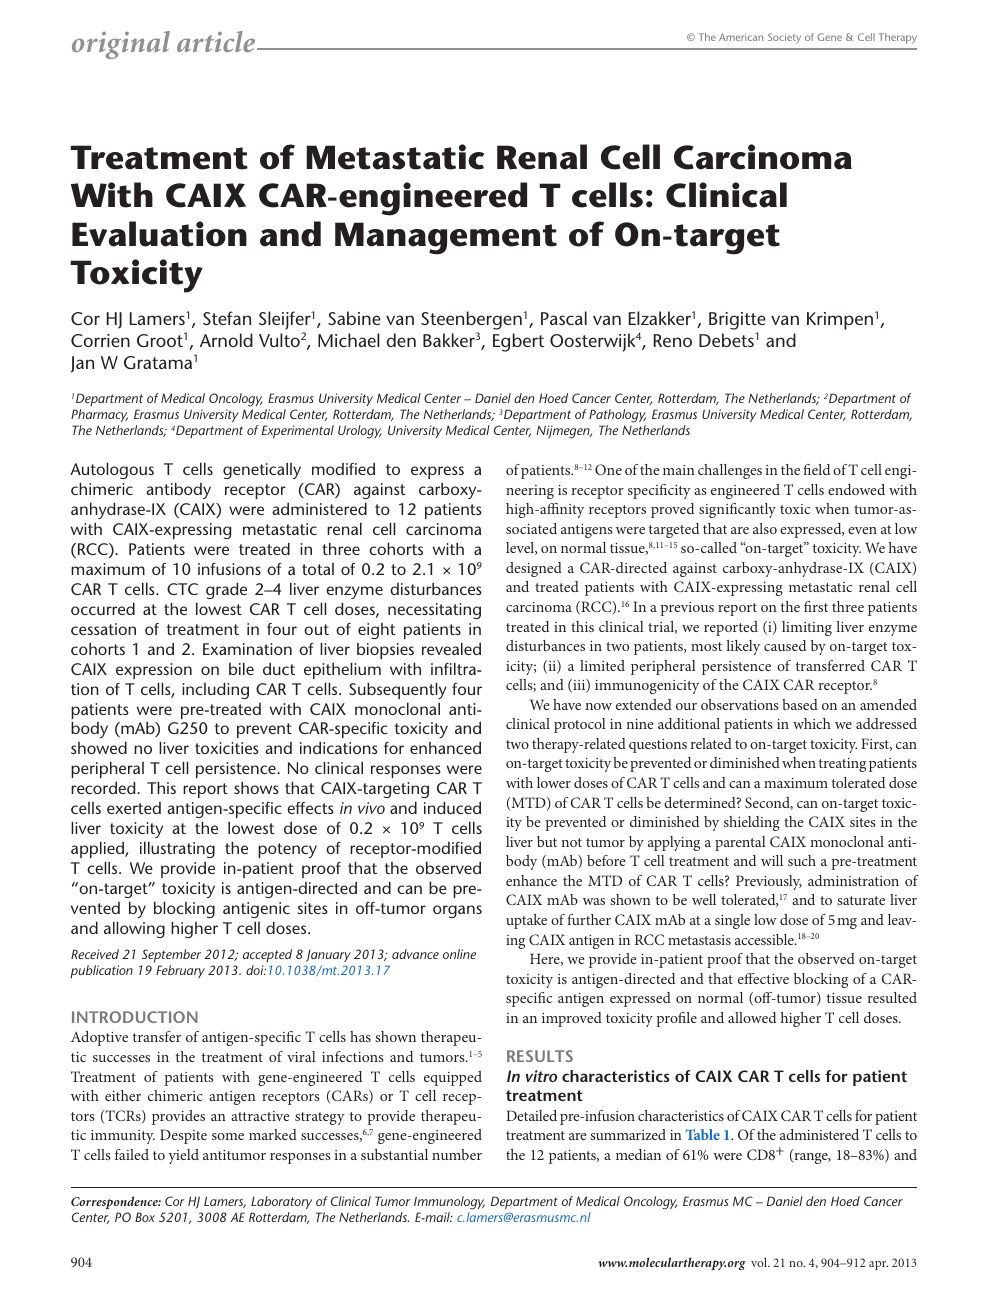 Treatment Of Metastatic Renal Cell Carcinoma With Caix Car Engineered T Cells Clinical Evaluation And Management Of On Target Toxicity Topic Of Research Paper In Clinical Medicine Download Scholarly Article Pdf And Read